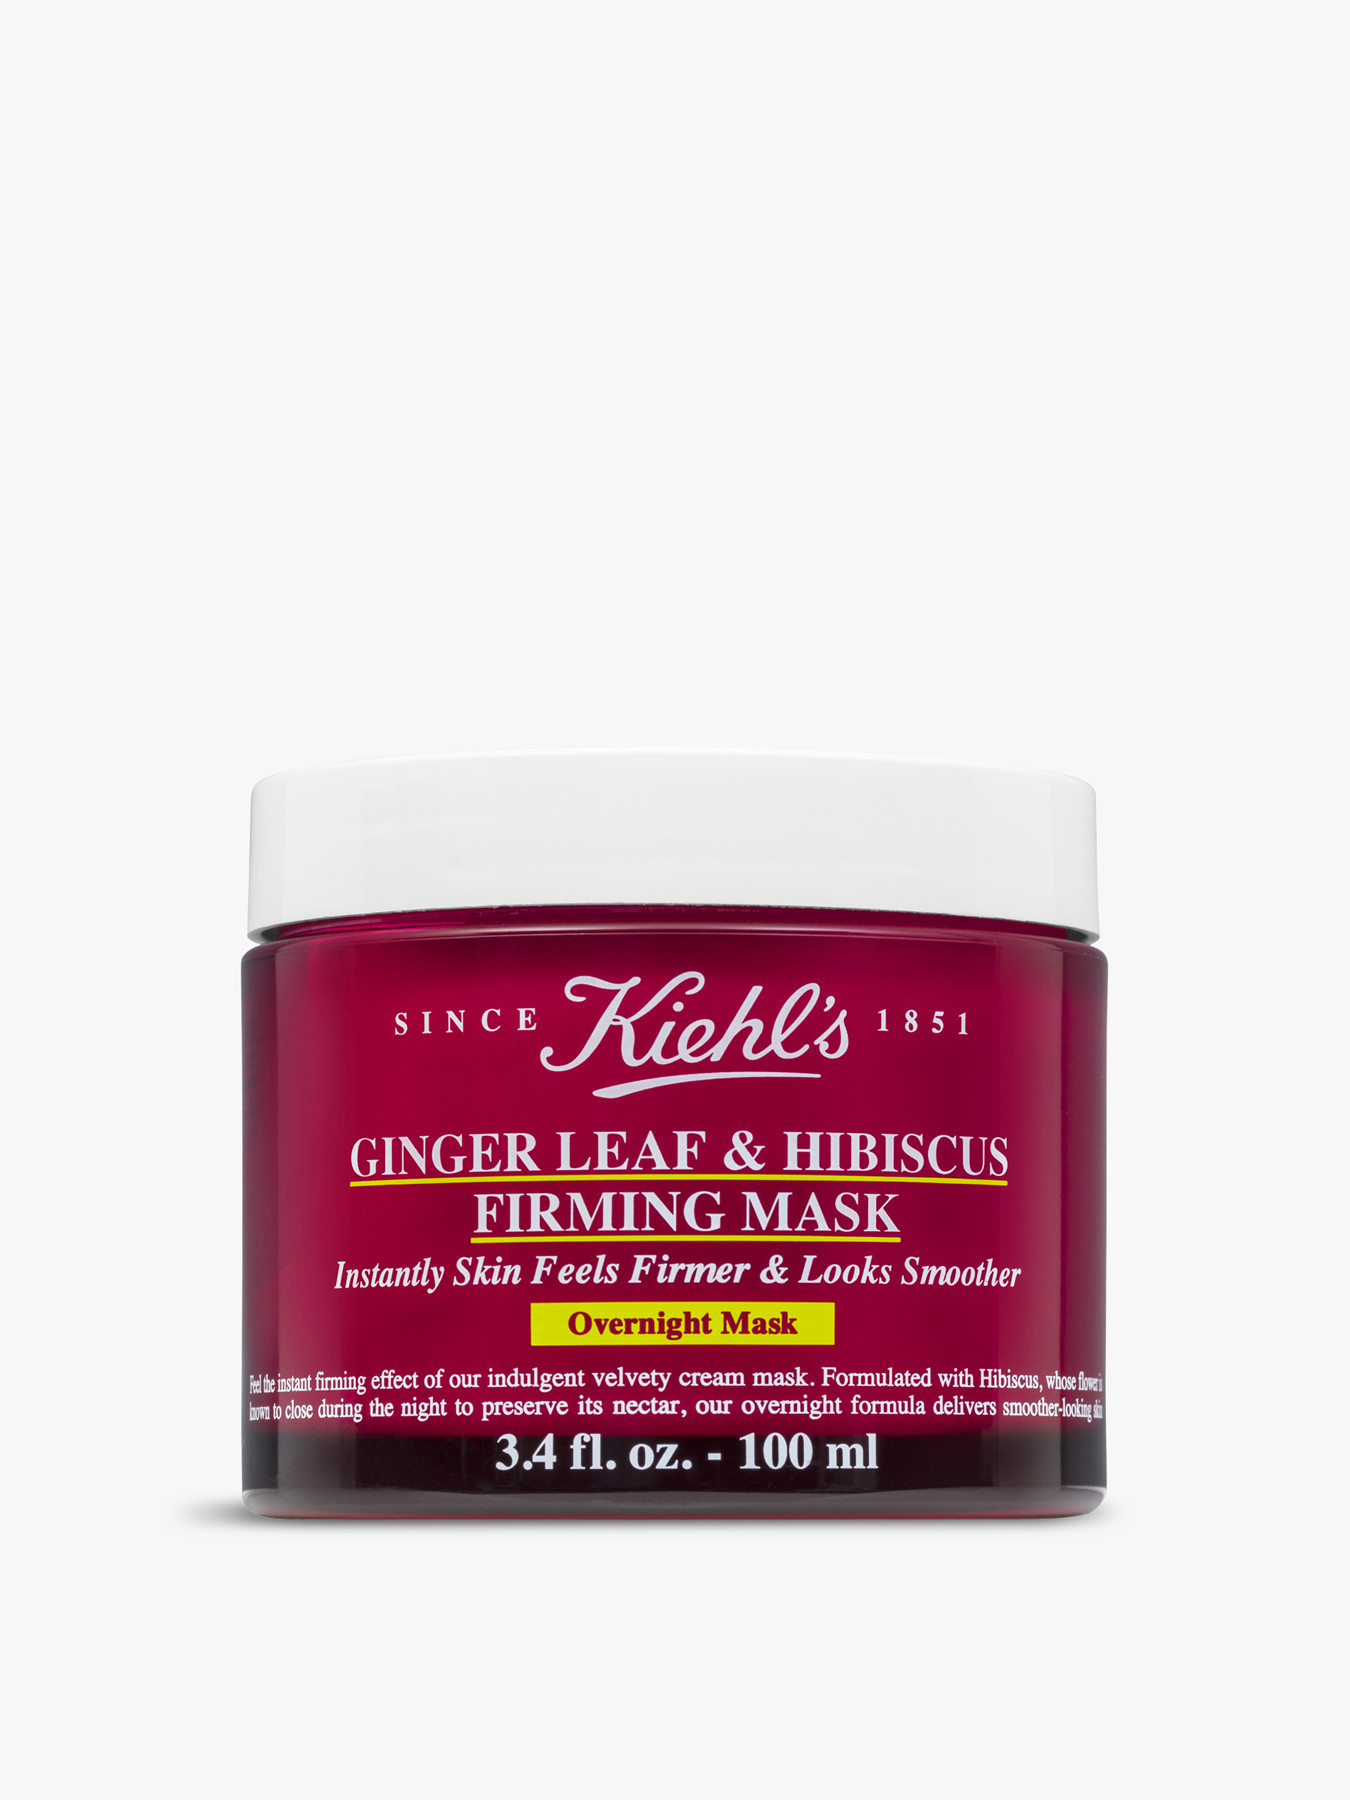 Kiehl's Since 1851 Ginger Leaf & Hibiscus Firming Mask